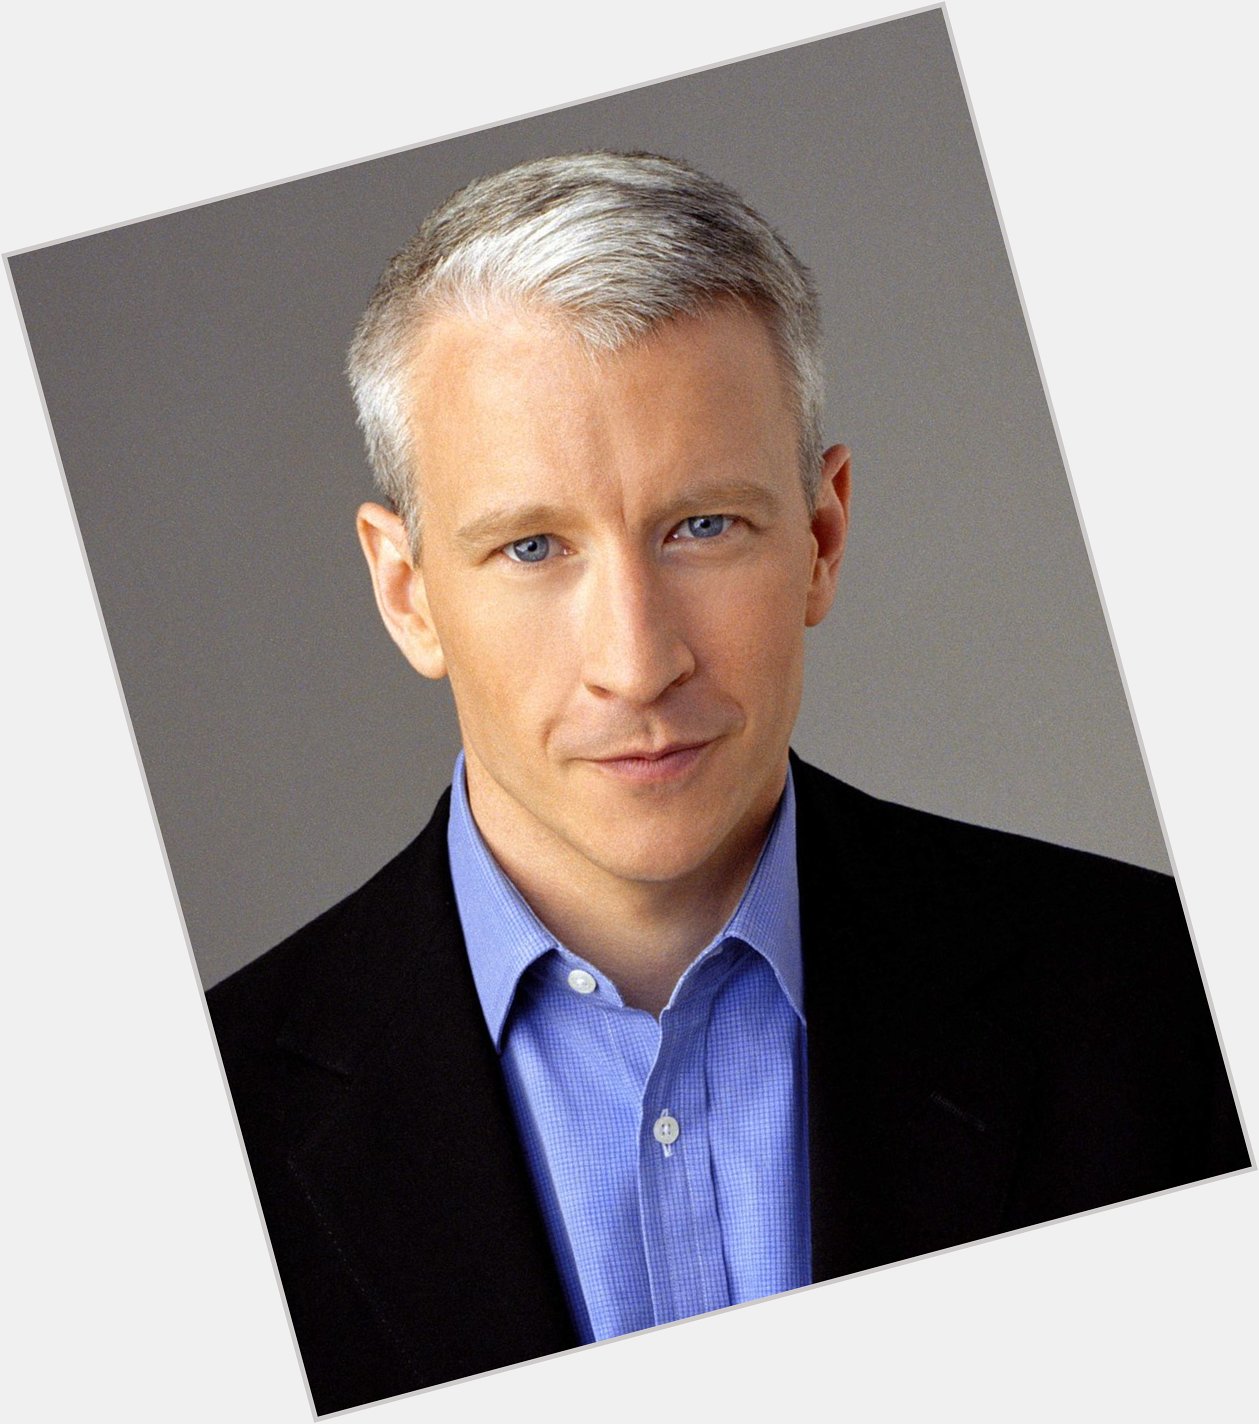 Happy Birthday to Anderson Cooper, who turns 48 today! 